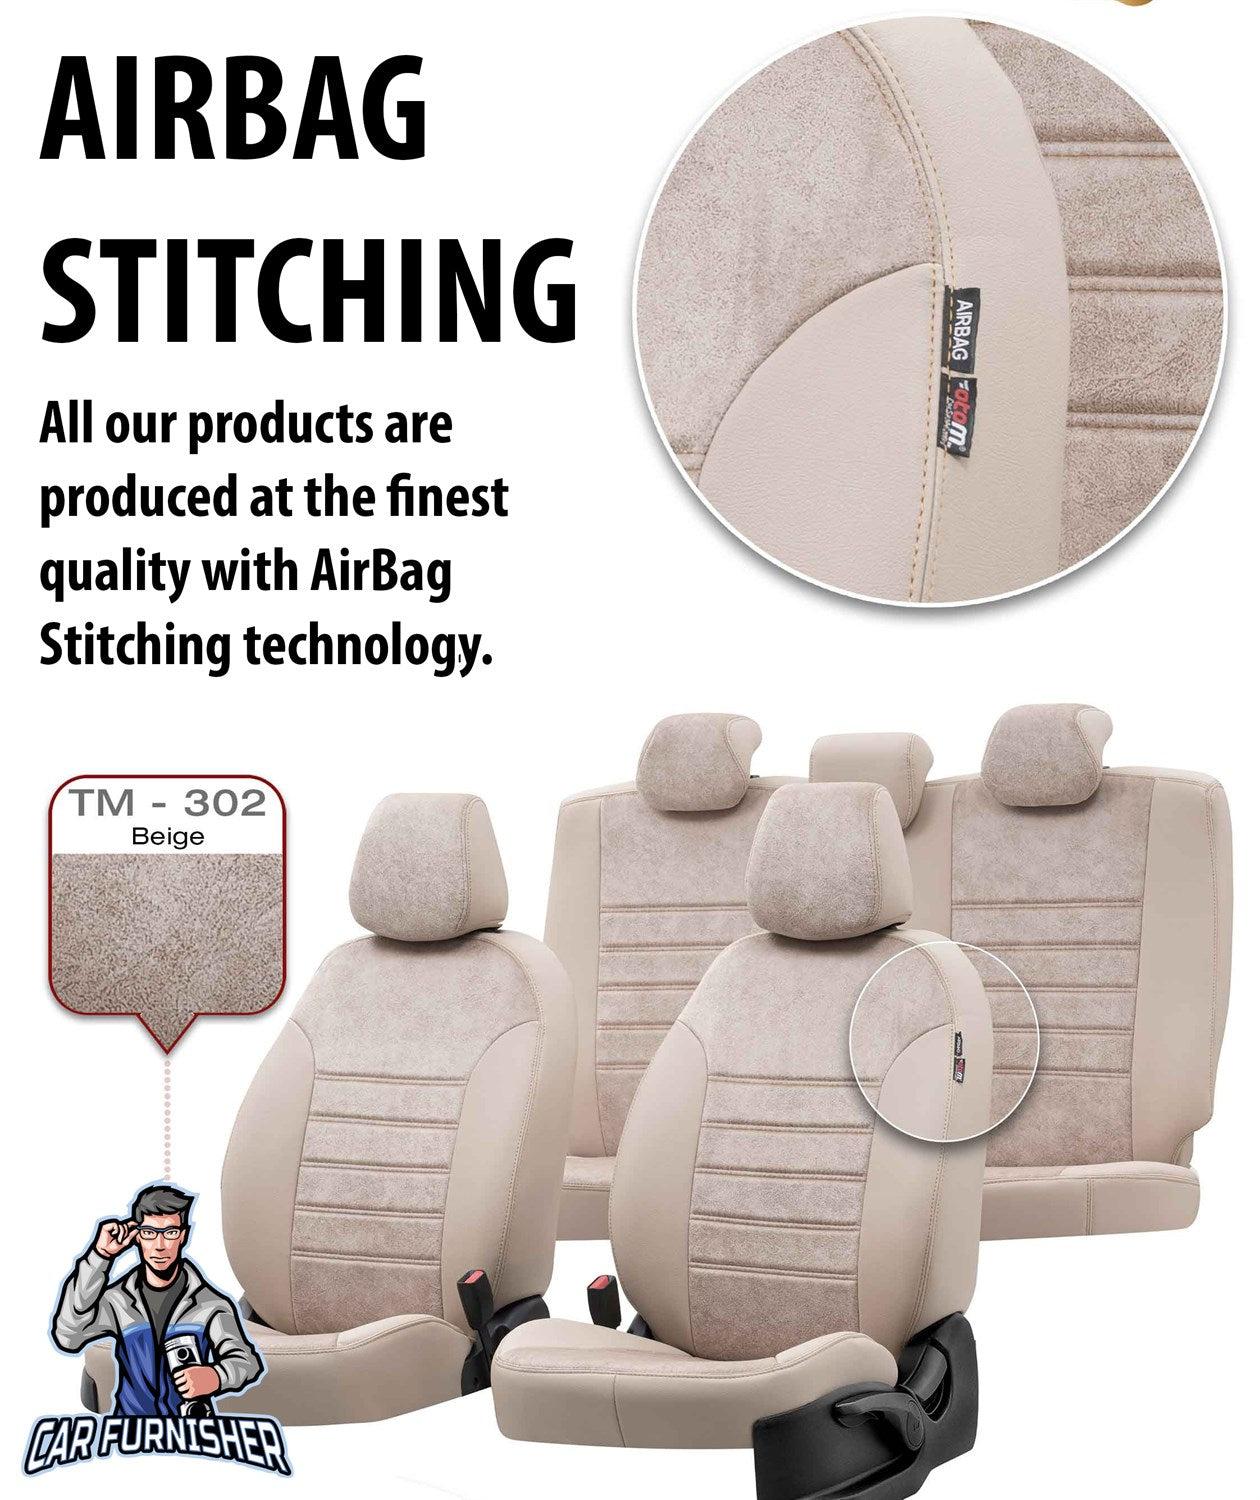 Man TGE Seat Covers Milano Suede Design Ivory Leather & Suede Fabric